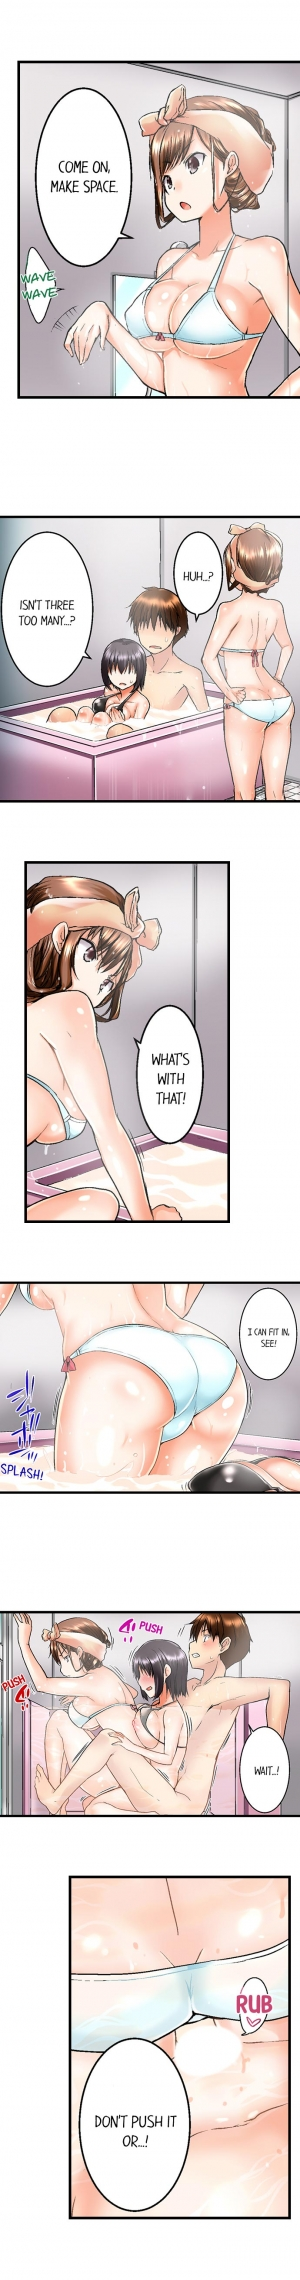 [Kaiduka] My Brother's Slipped Inside Me in The Bathtub (Ongoing) - Page 18